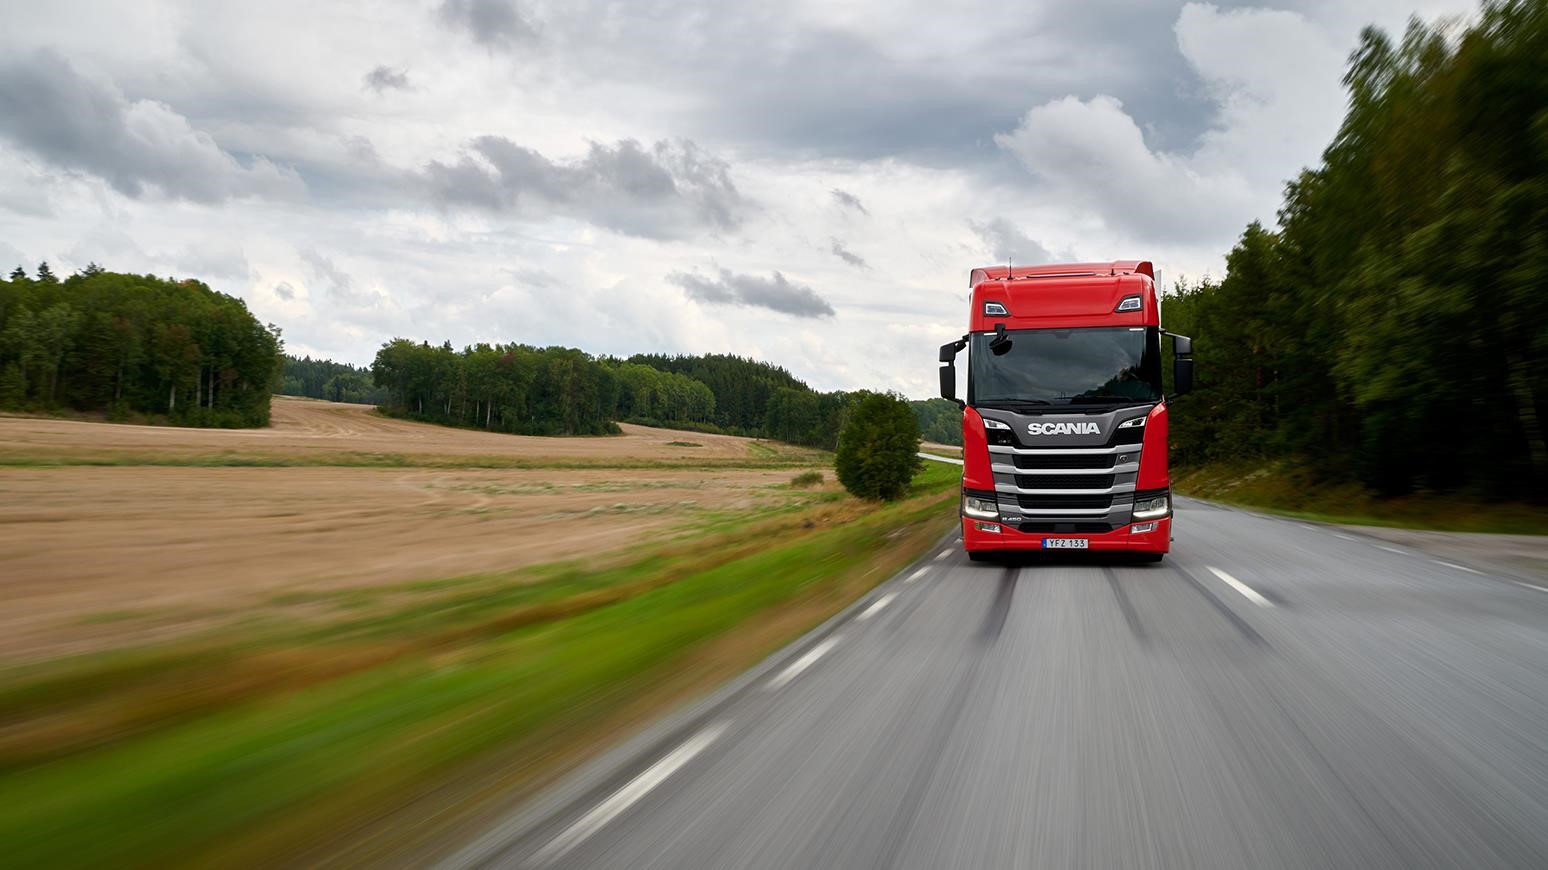 Green Truck 2019 Award Goes To Scania For The Third Consecutive Year